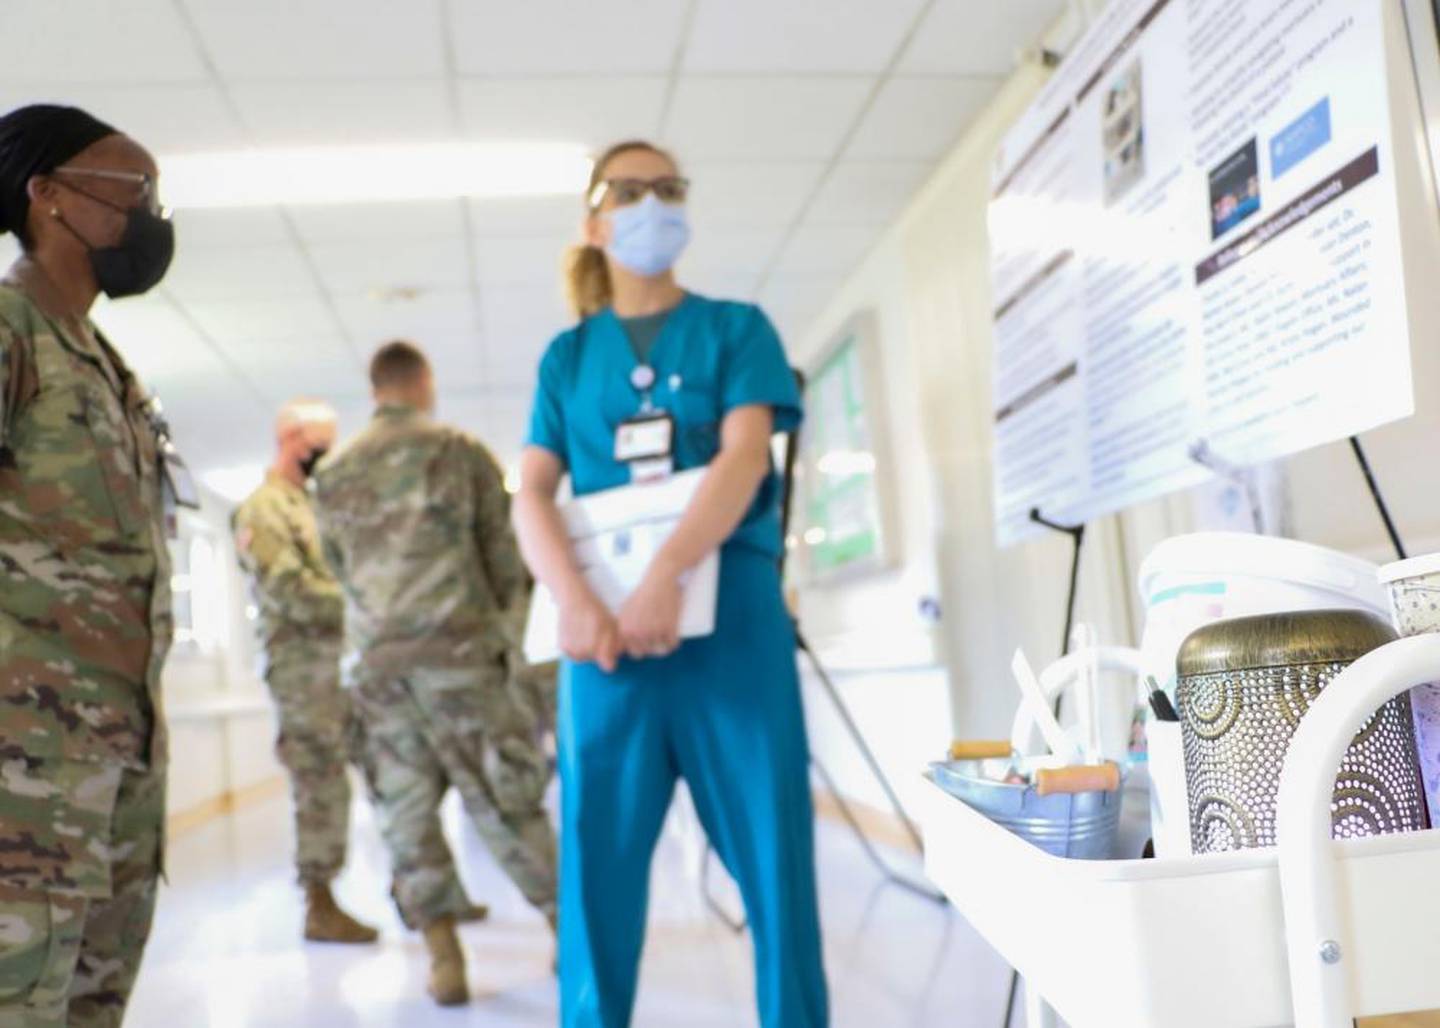 Landstuhl Regional Medical Center recognized the crucial contributions of medical professionals during National Nurses Week from May 6-12, 2022. (Marcy Sanchez/Army)